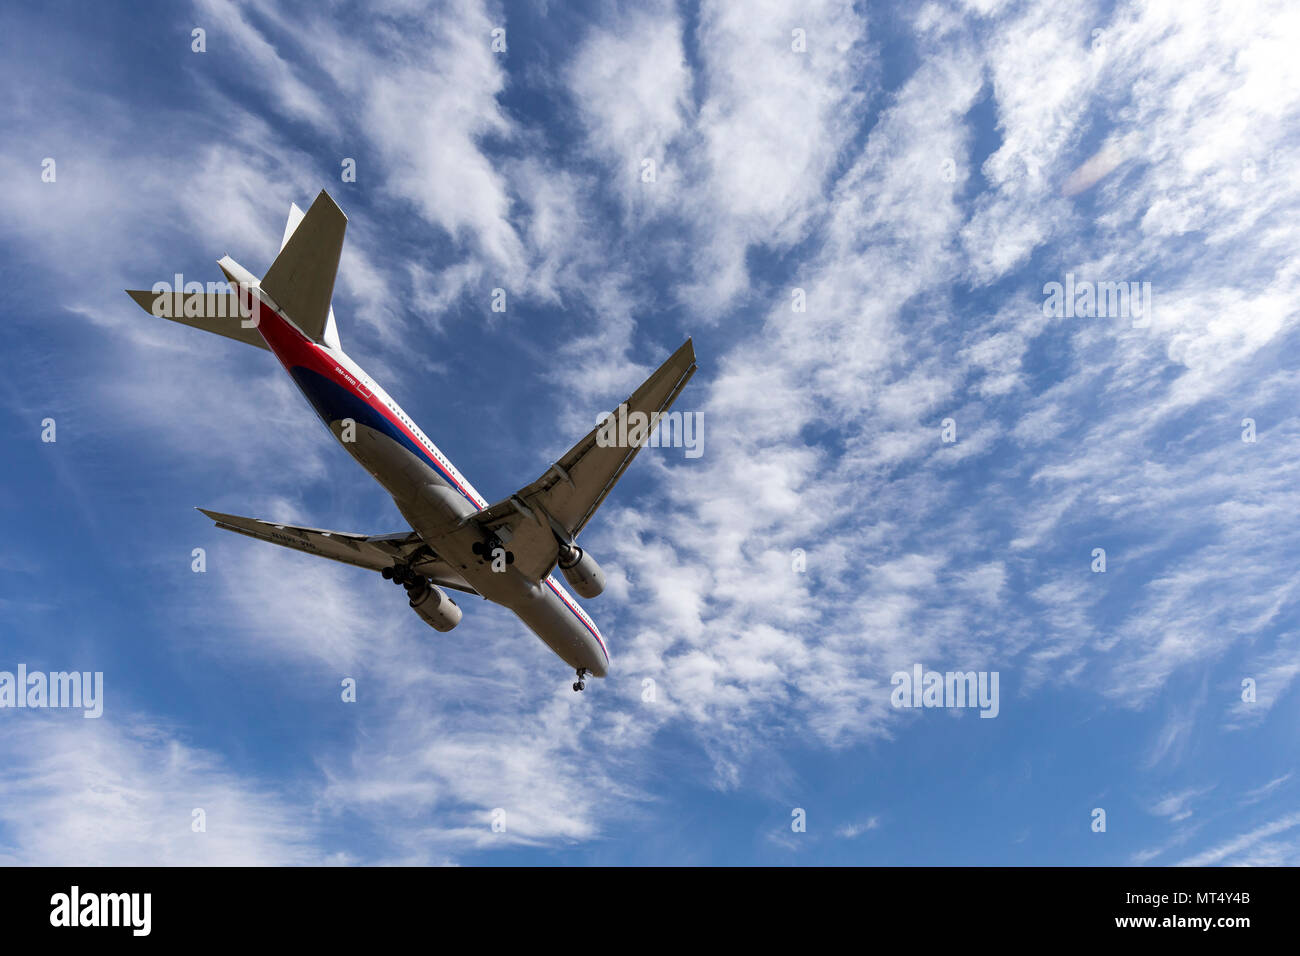 Malaysia Airlines Boeing 777 airliner 9M-MRB on approach to land a Melbourne International Airport. Stock Photo